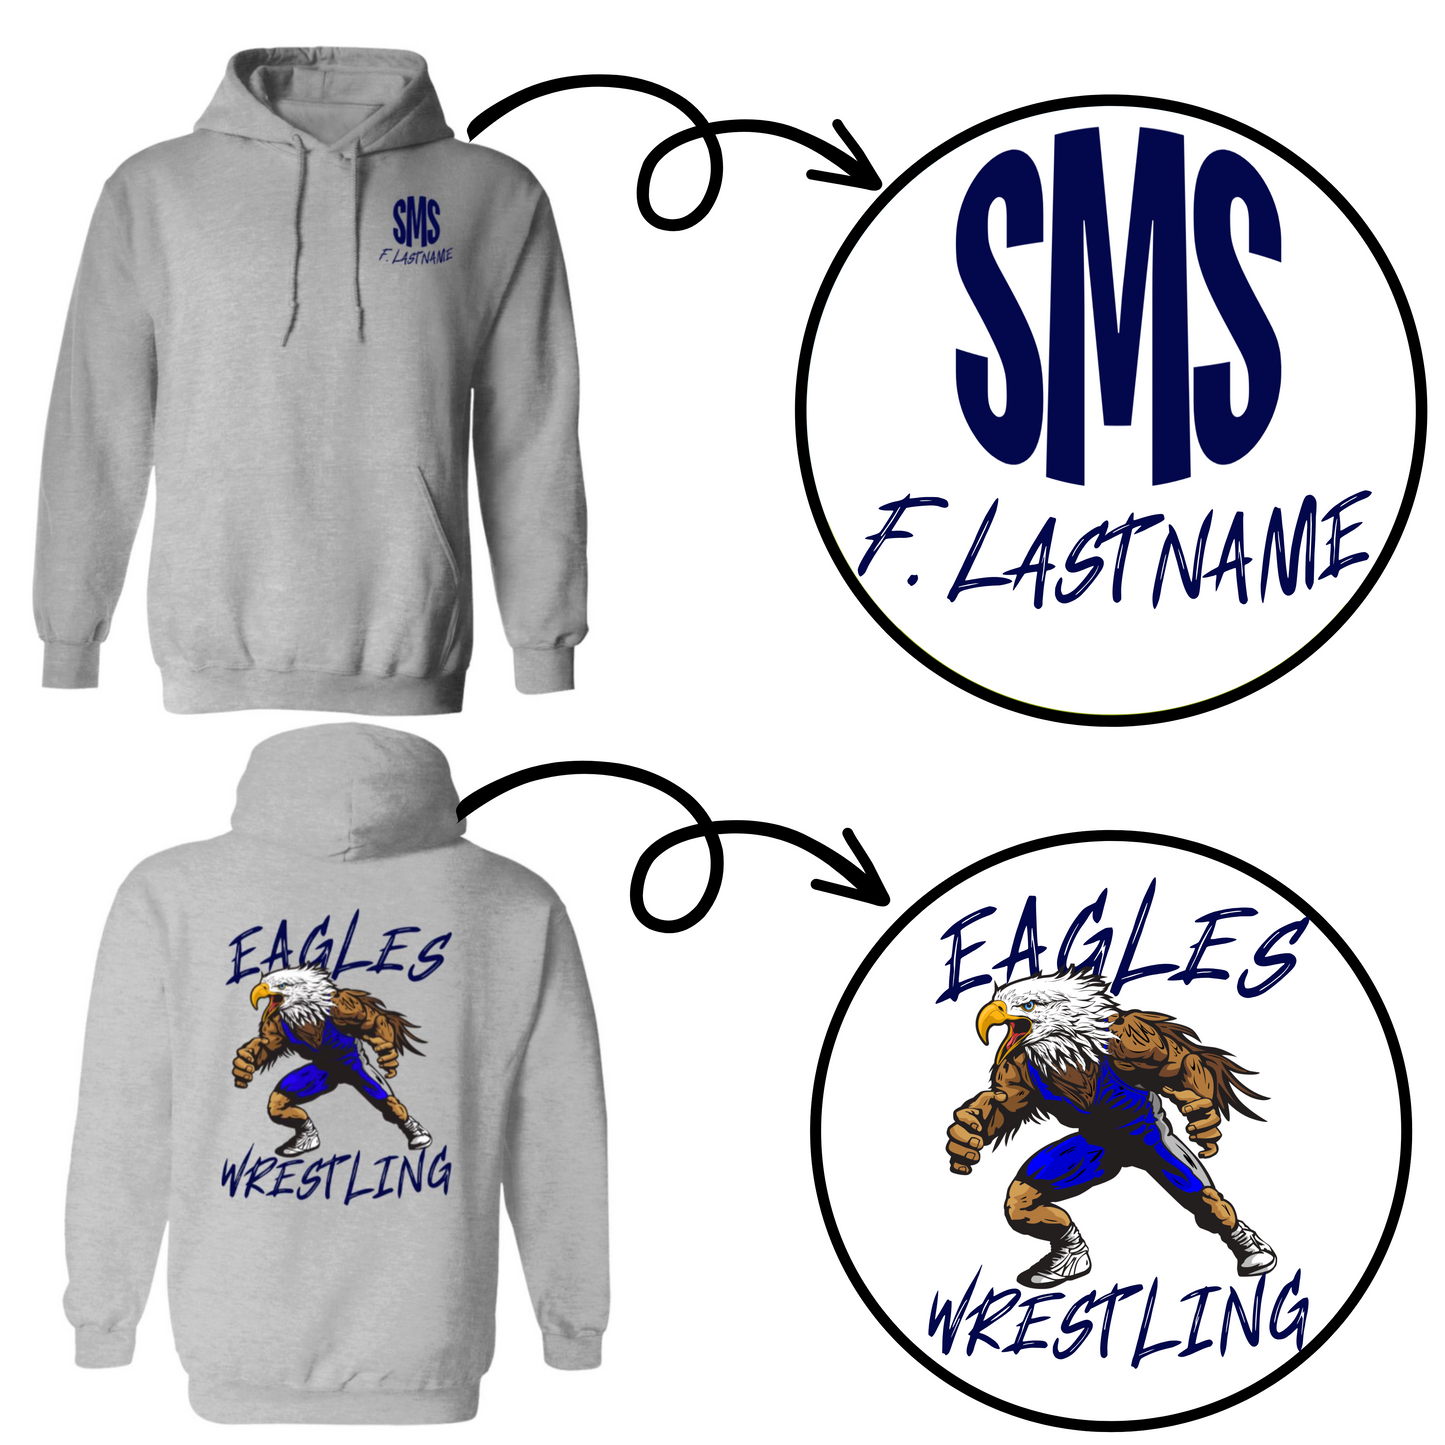 Sierra Middle School Wrestling: Where Personalized Shirts and Victory Collide!